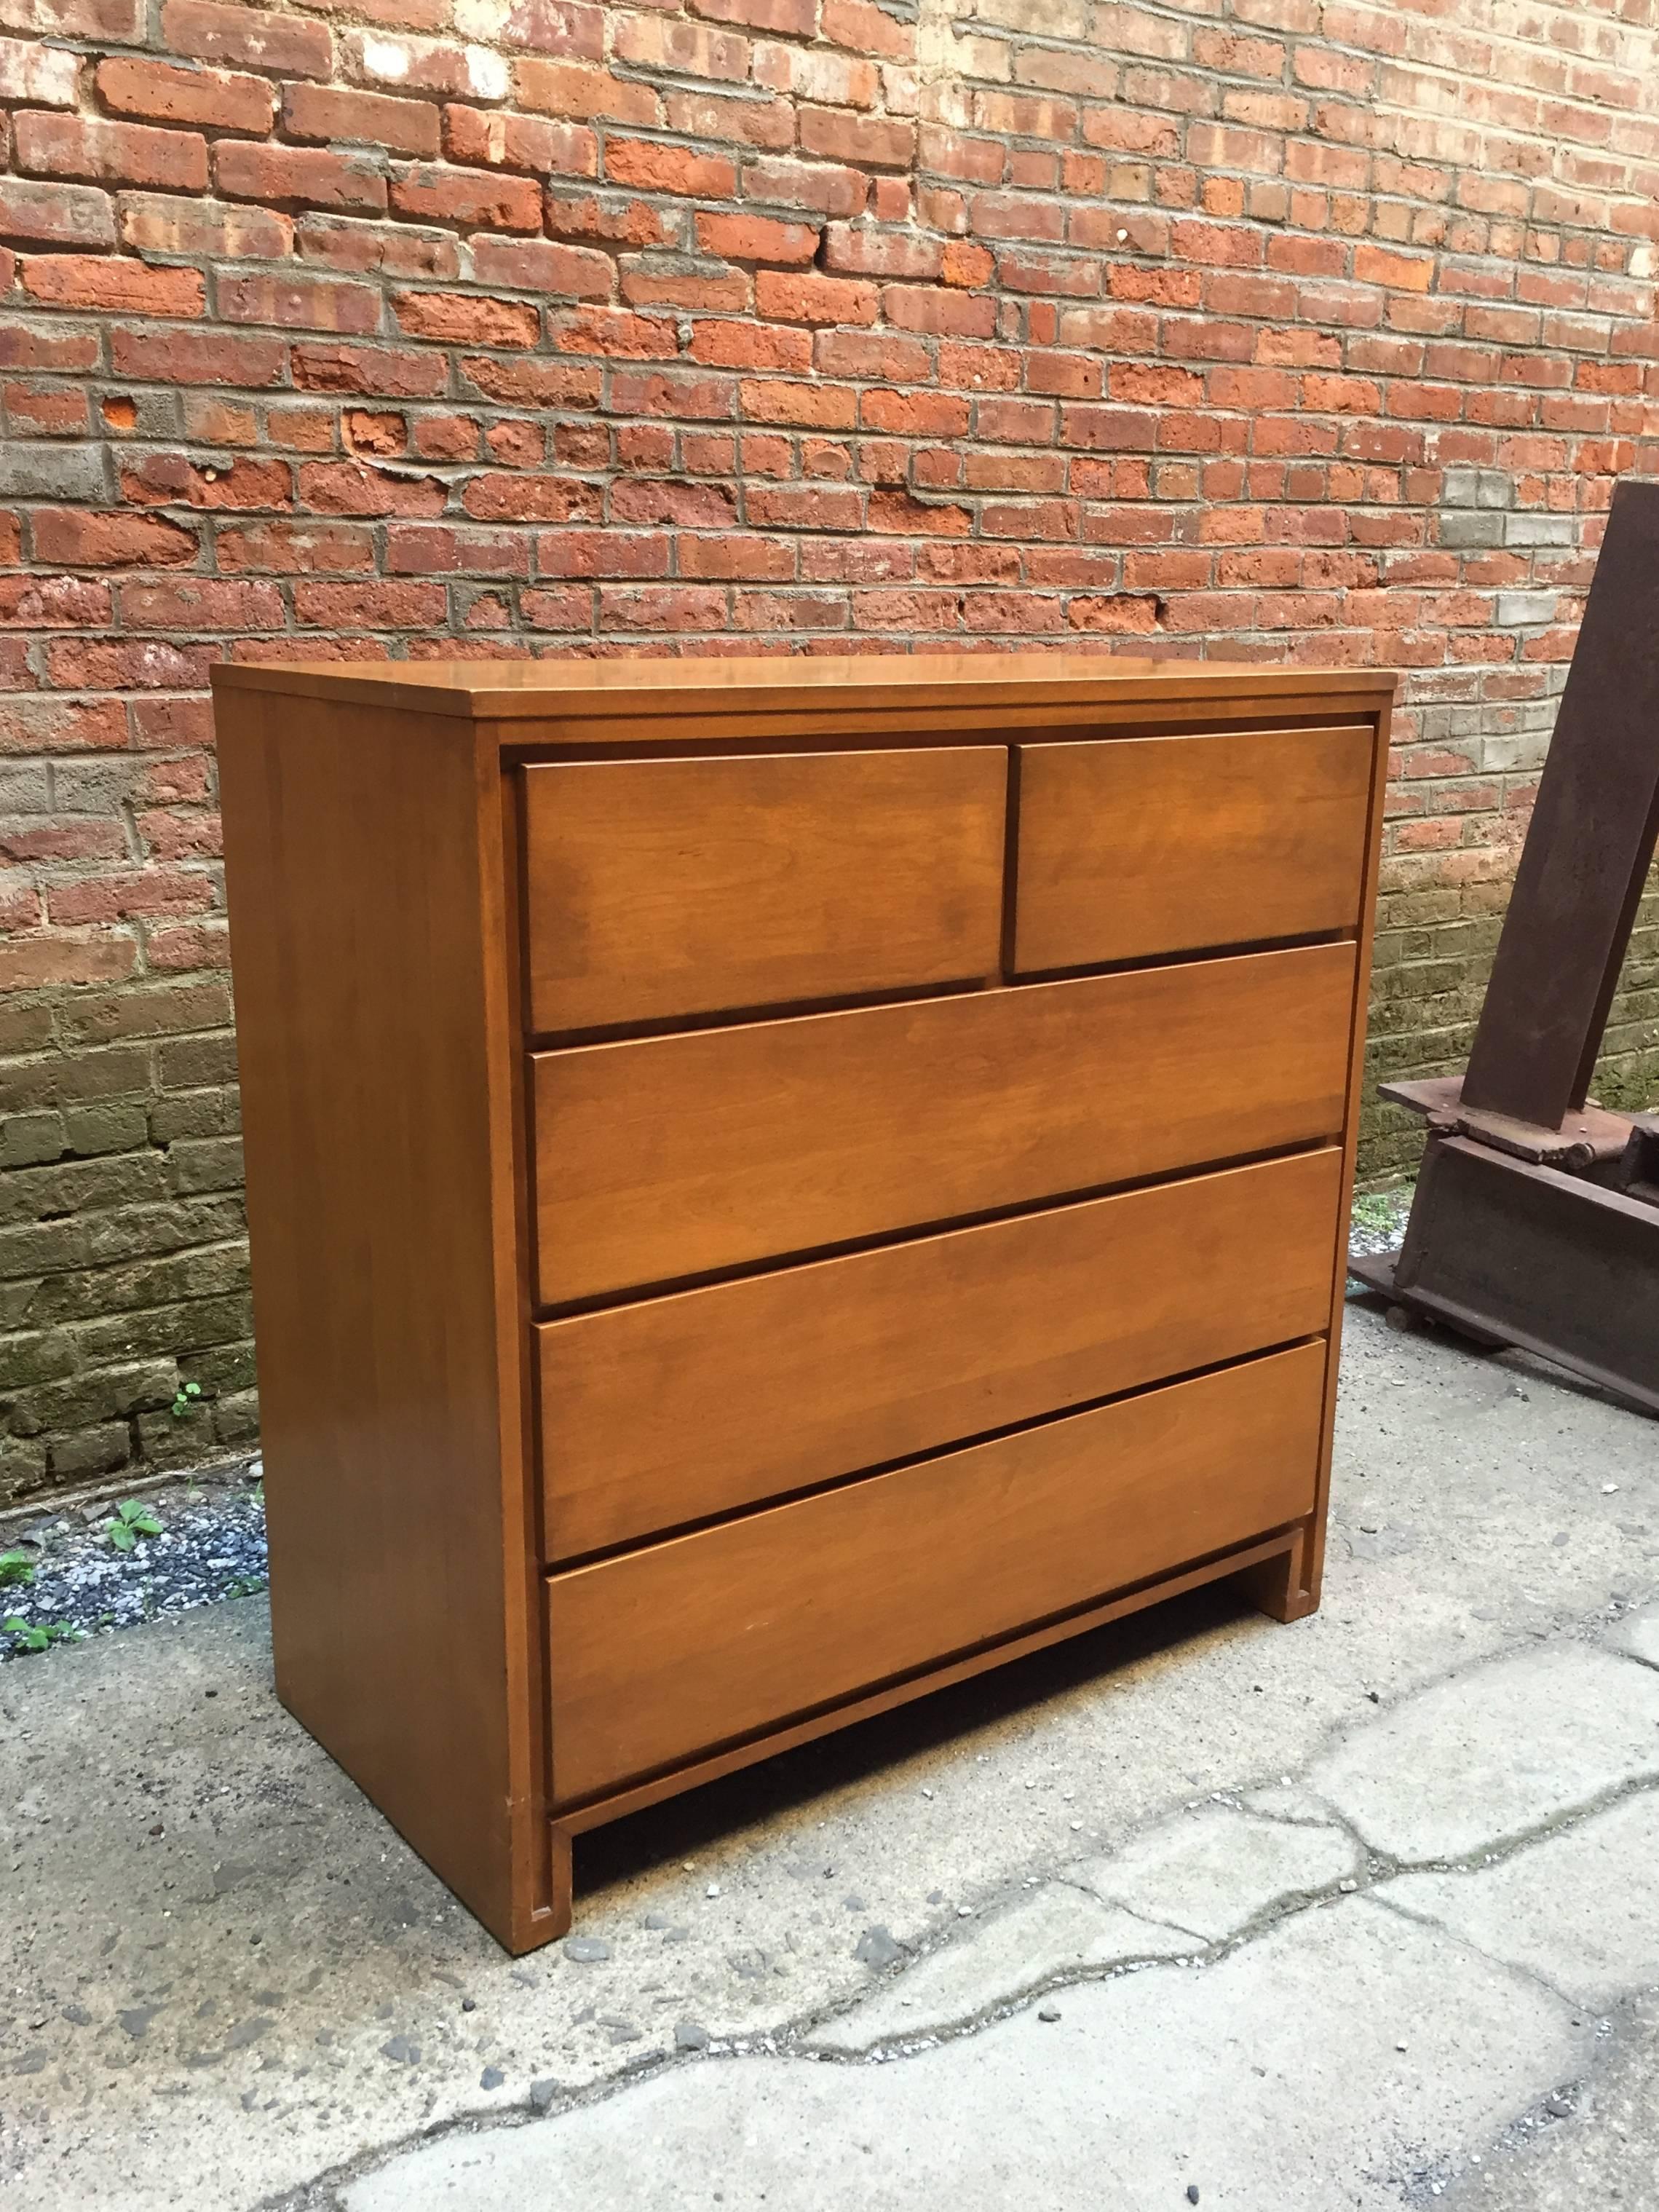 The design simplicity is either attributed to Leslie Diamond, but more famously, to Russel Wright for Conant Ball. Excellent durable and solid maple or birch construction. Two over three design. Burn in signature in top drawer.

Very good original